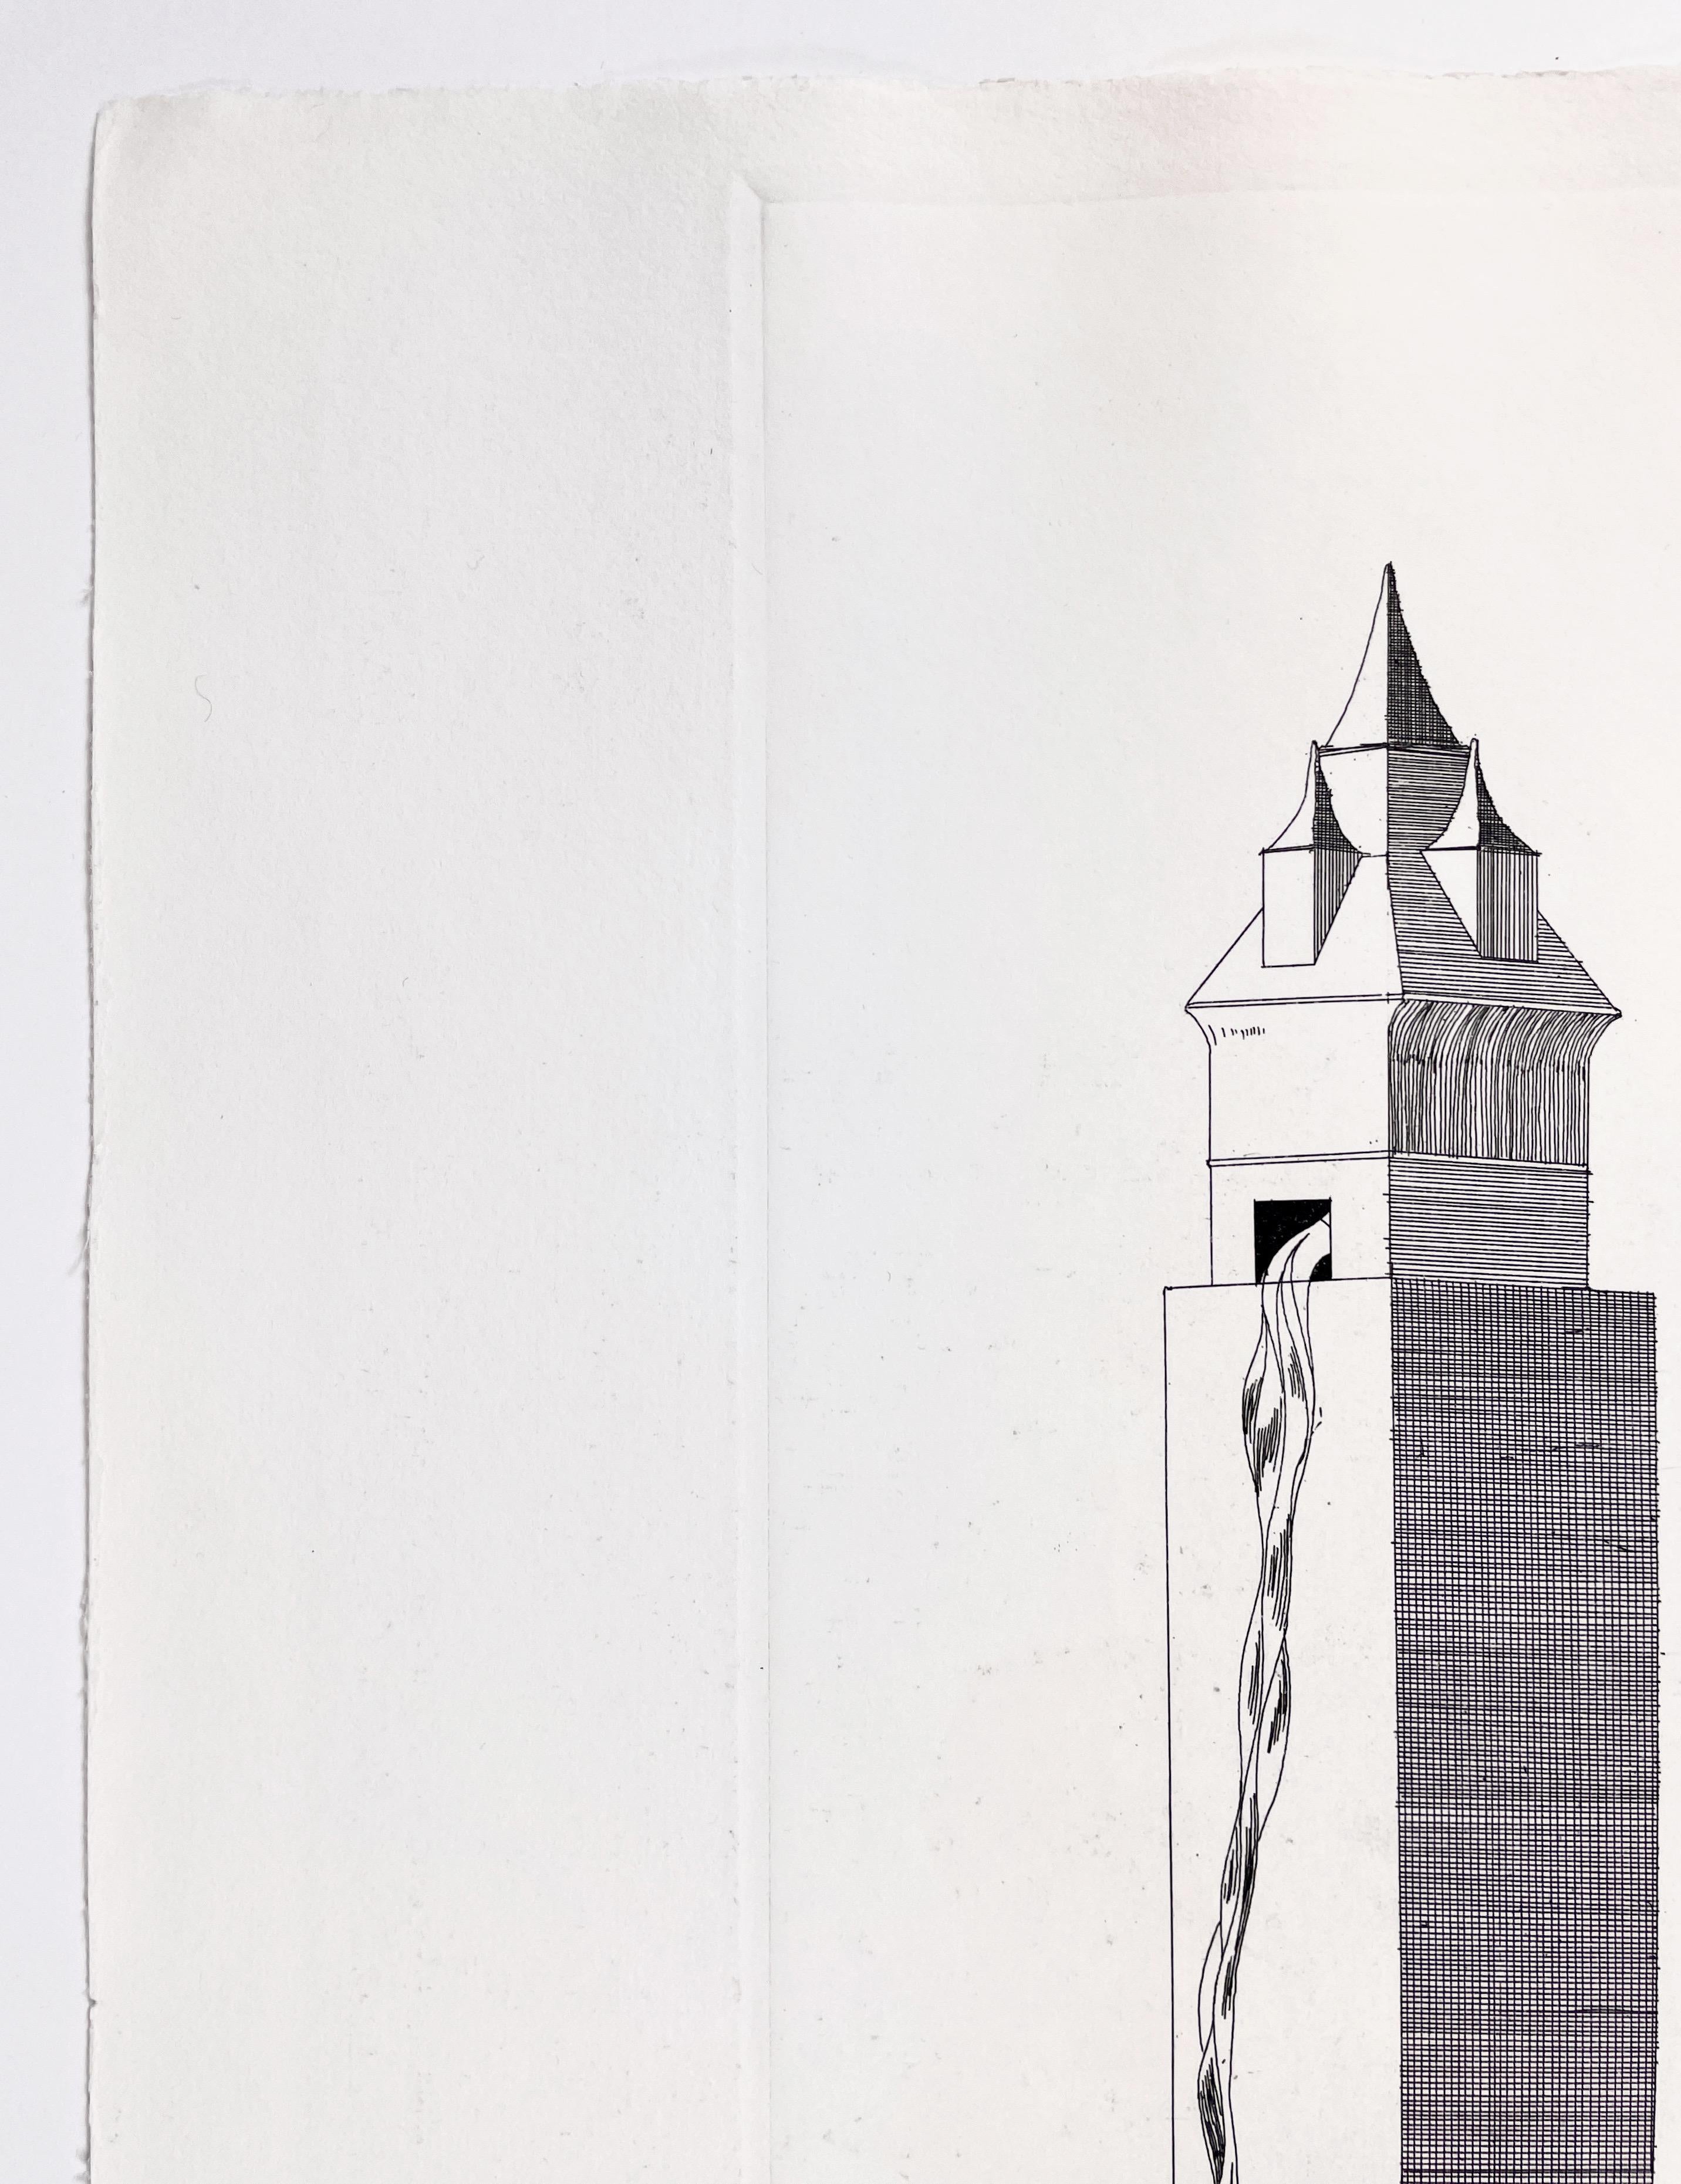 The Tower had one Window (Six Fairy Tales from the Brothers Grimm) David Hockney 2